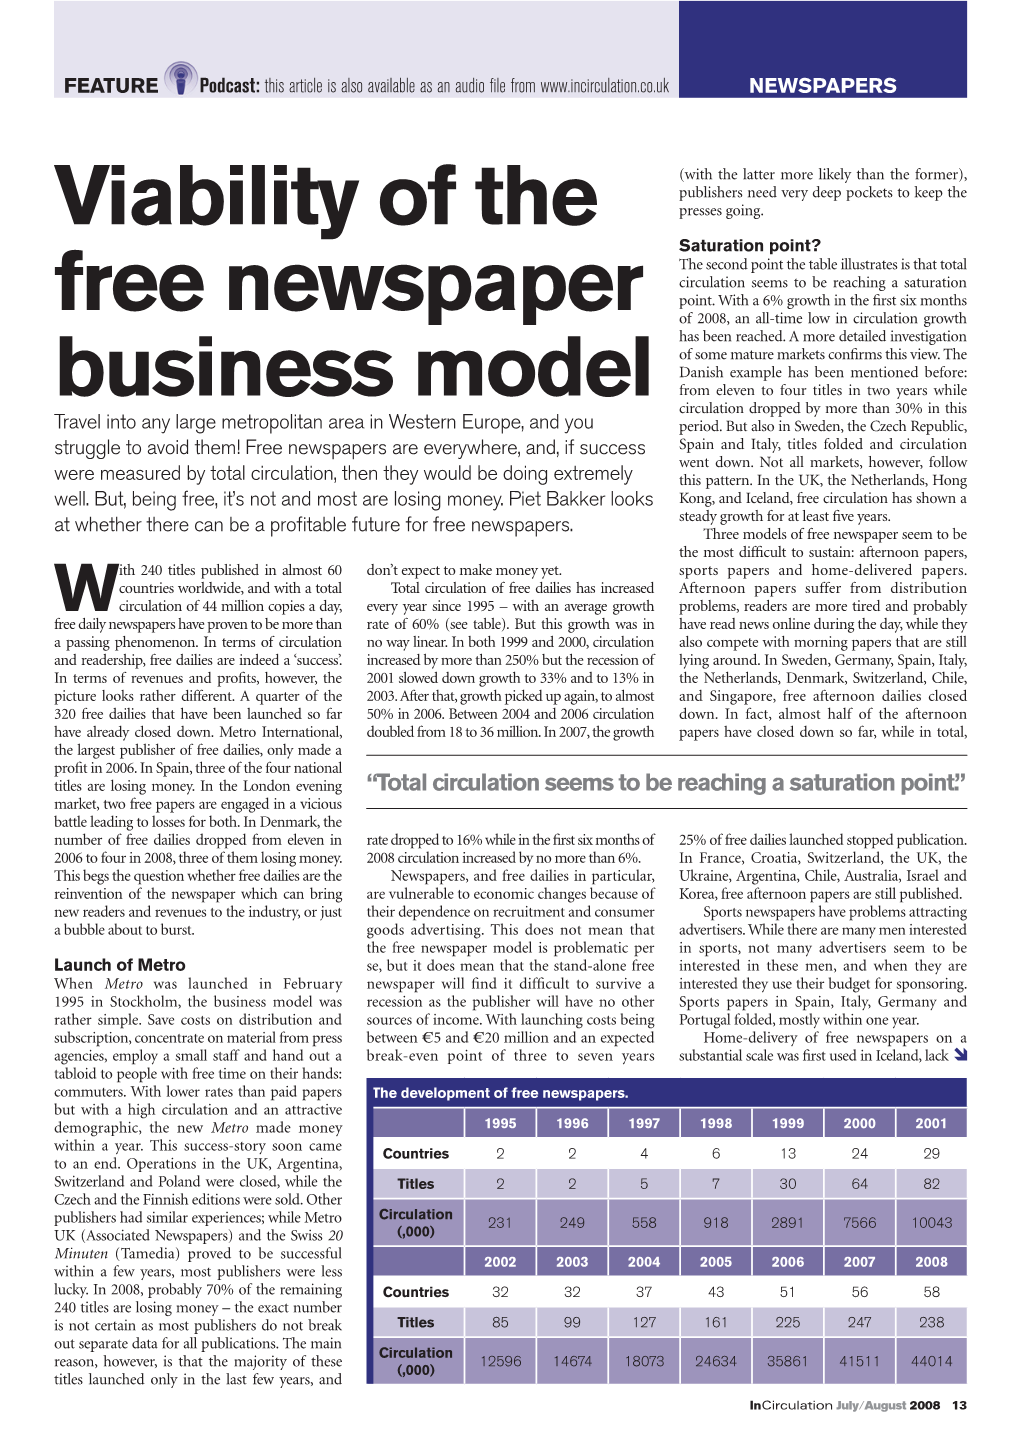 Viability of the Free Newspaper Business Model